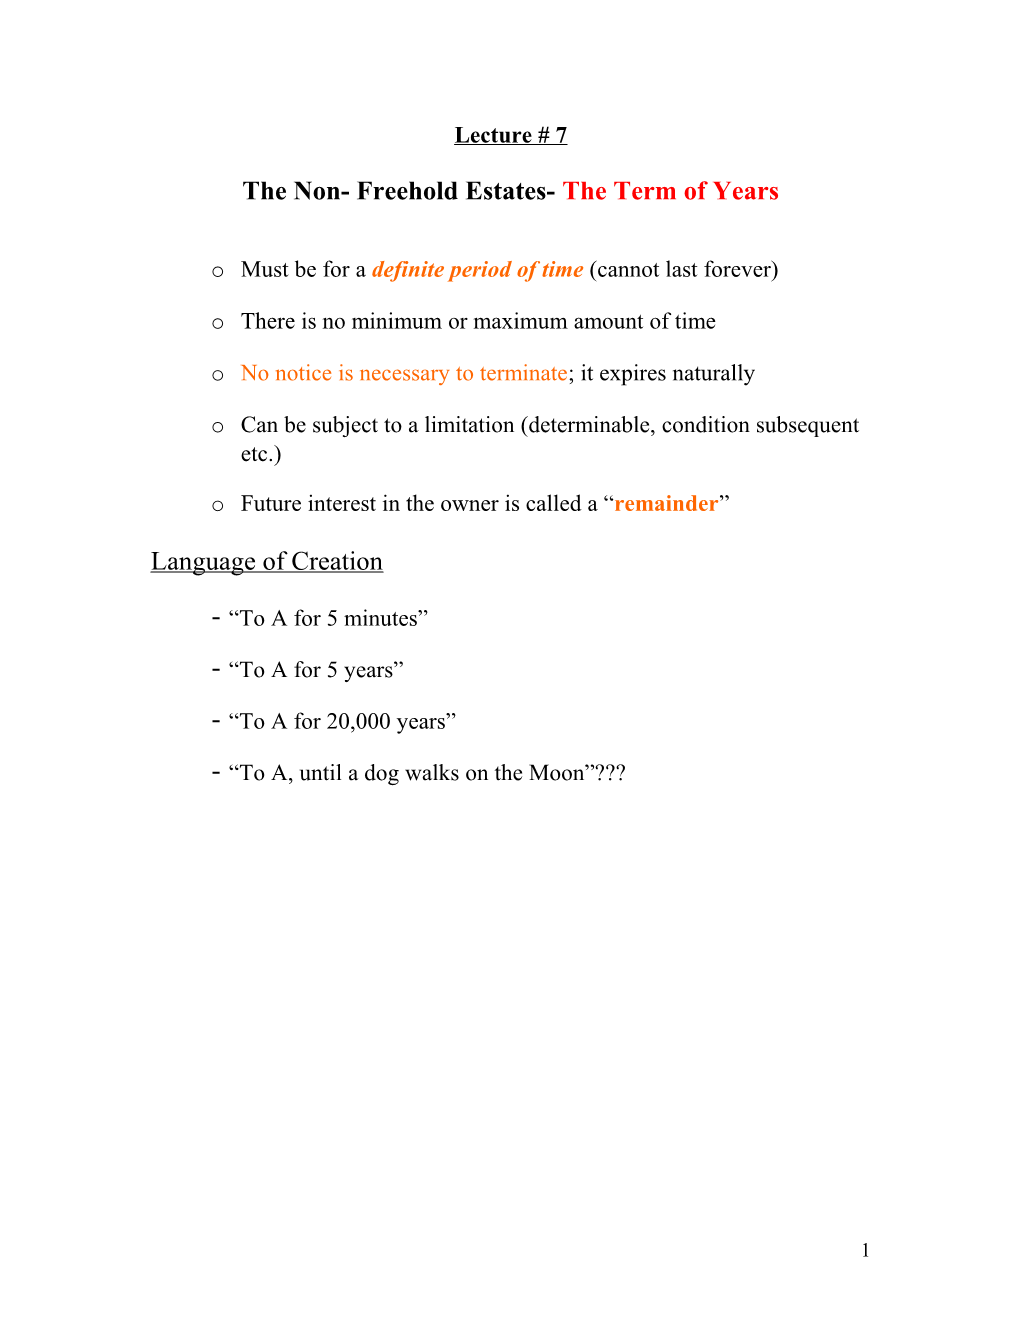 The Non- Freehold Estates- the Term of Years